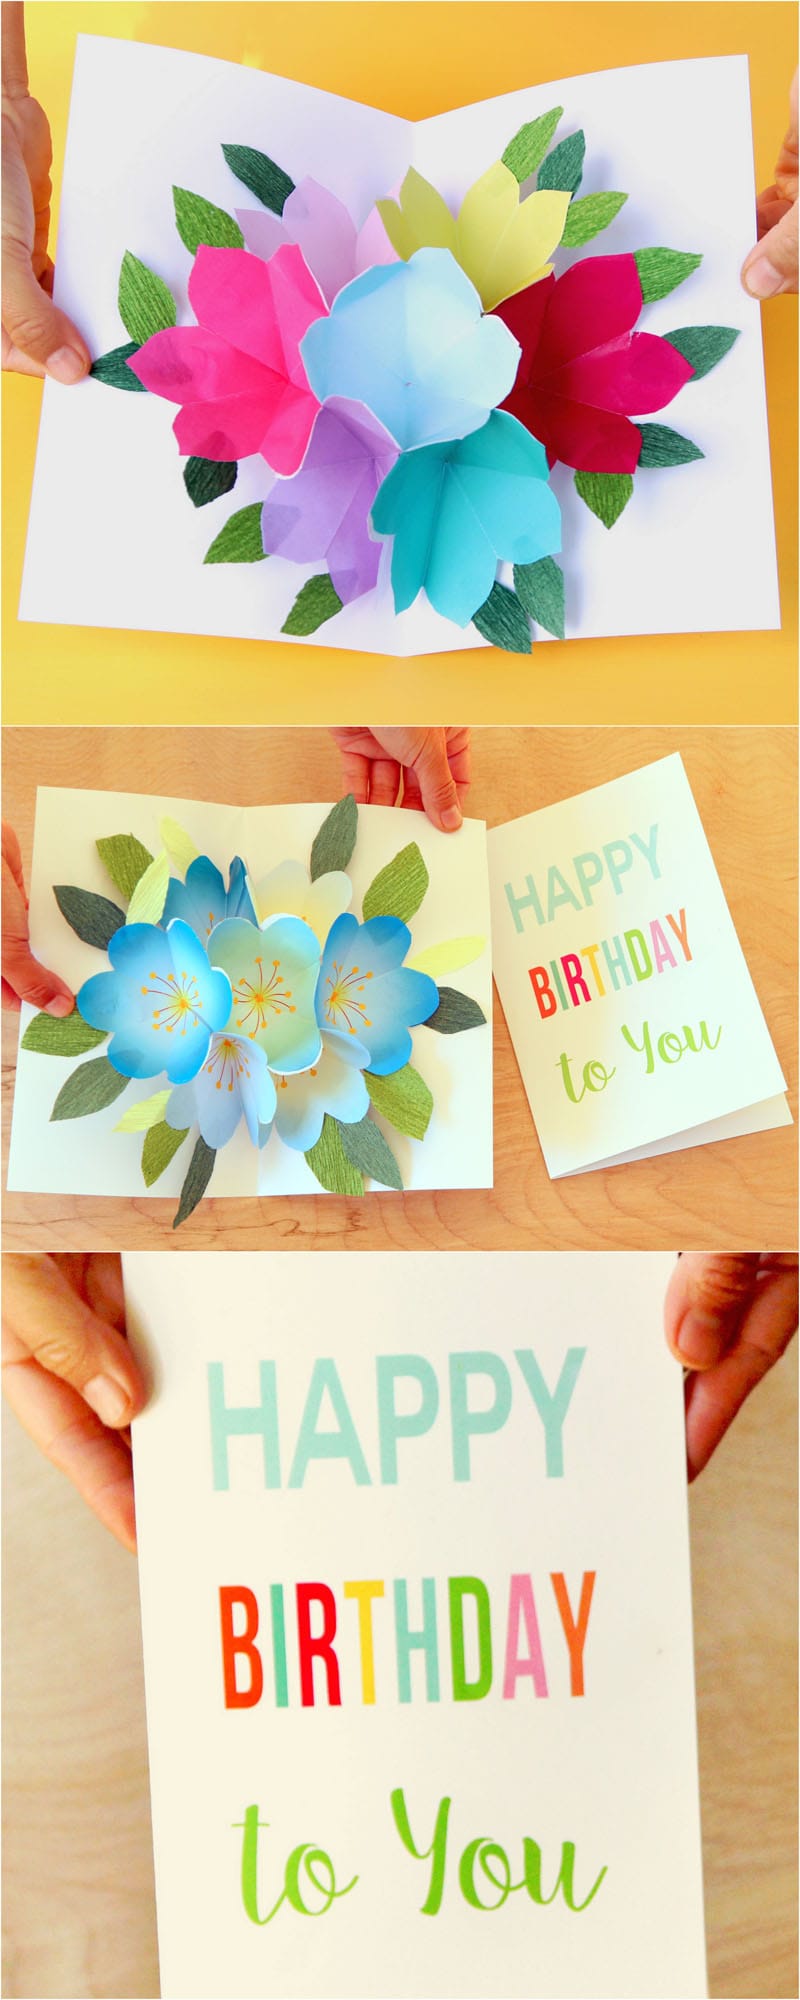 Free Printable Happy Birthday Card with Pop Up Bouquet - A Piece Intended For Happy Birthday Pop Up Card Free Template